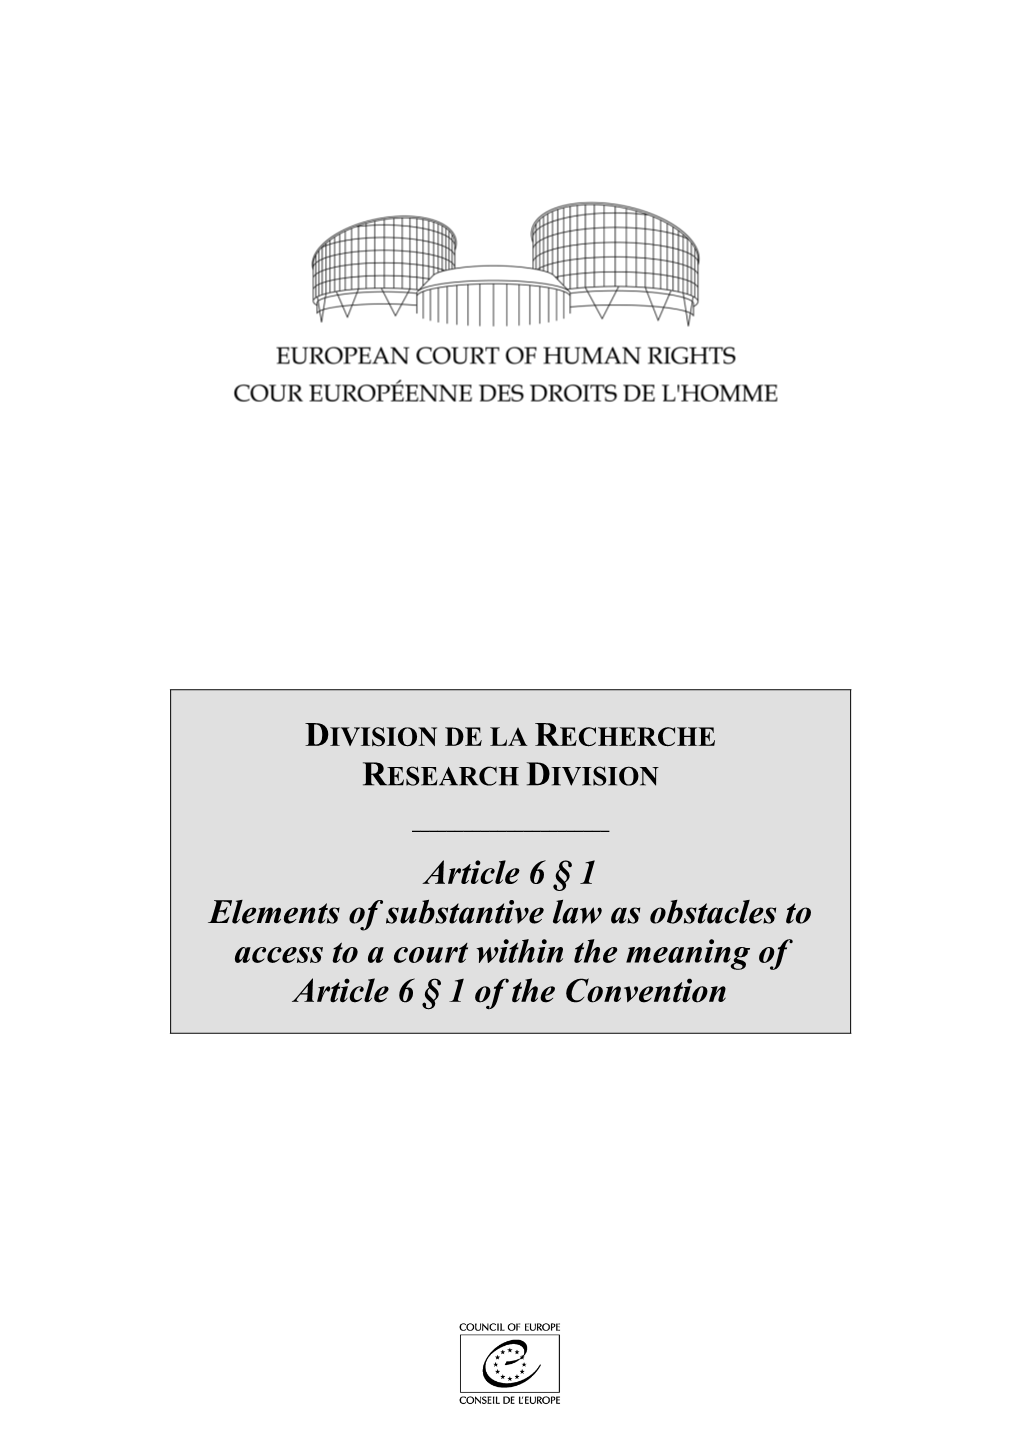 Elements of Substantive Law As Obstacles to Access to a Court Within the Meaning of Article 6